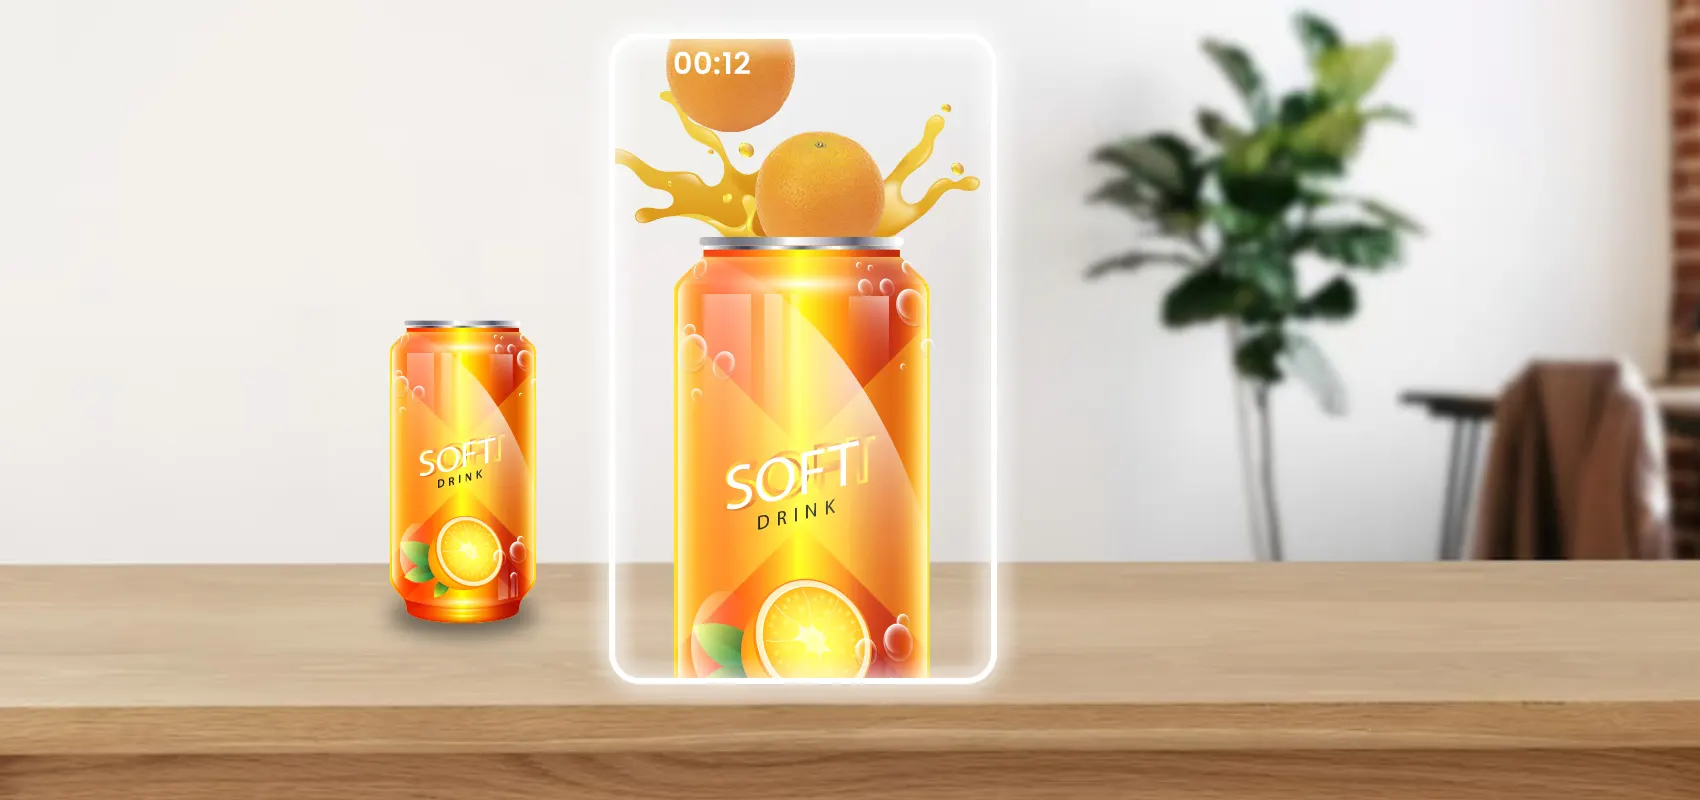 beverage augmented reality